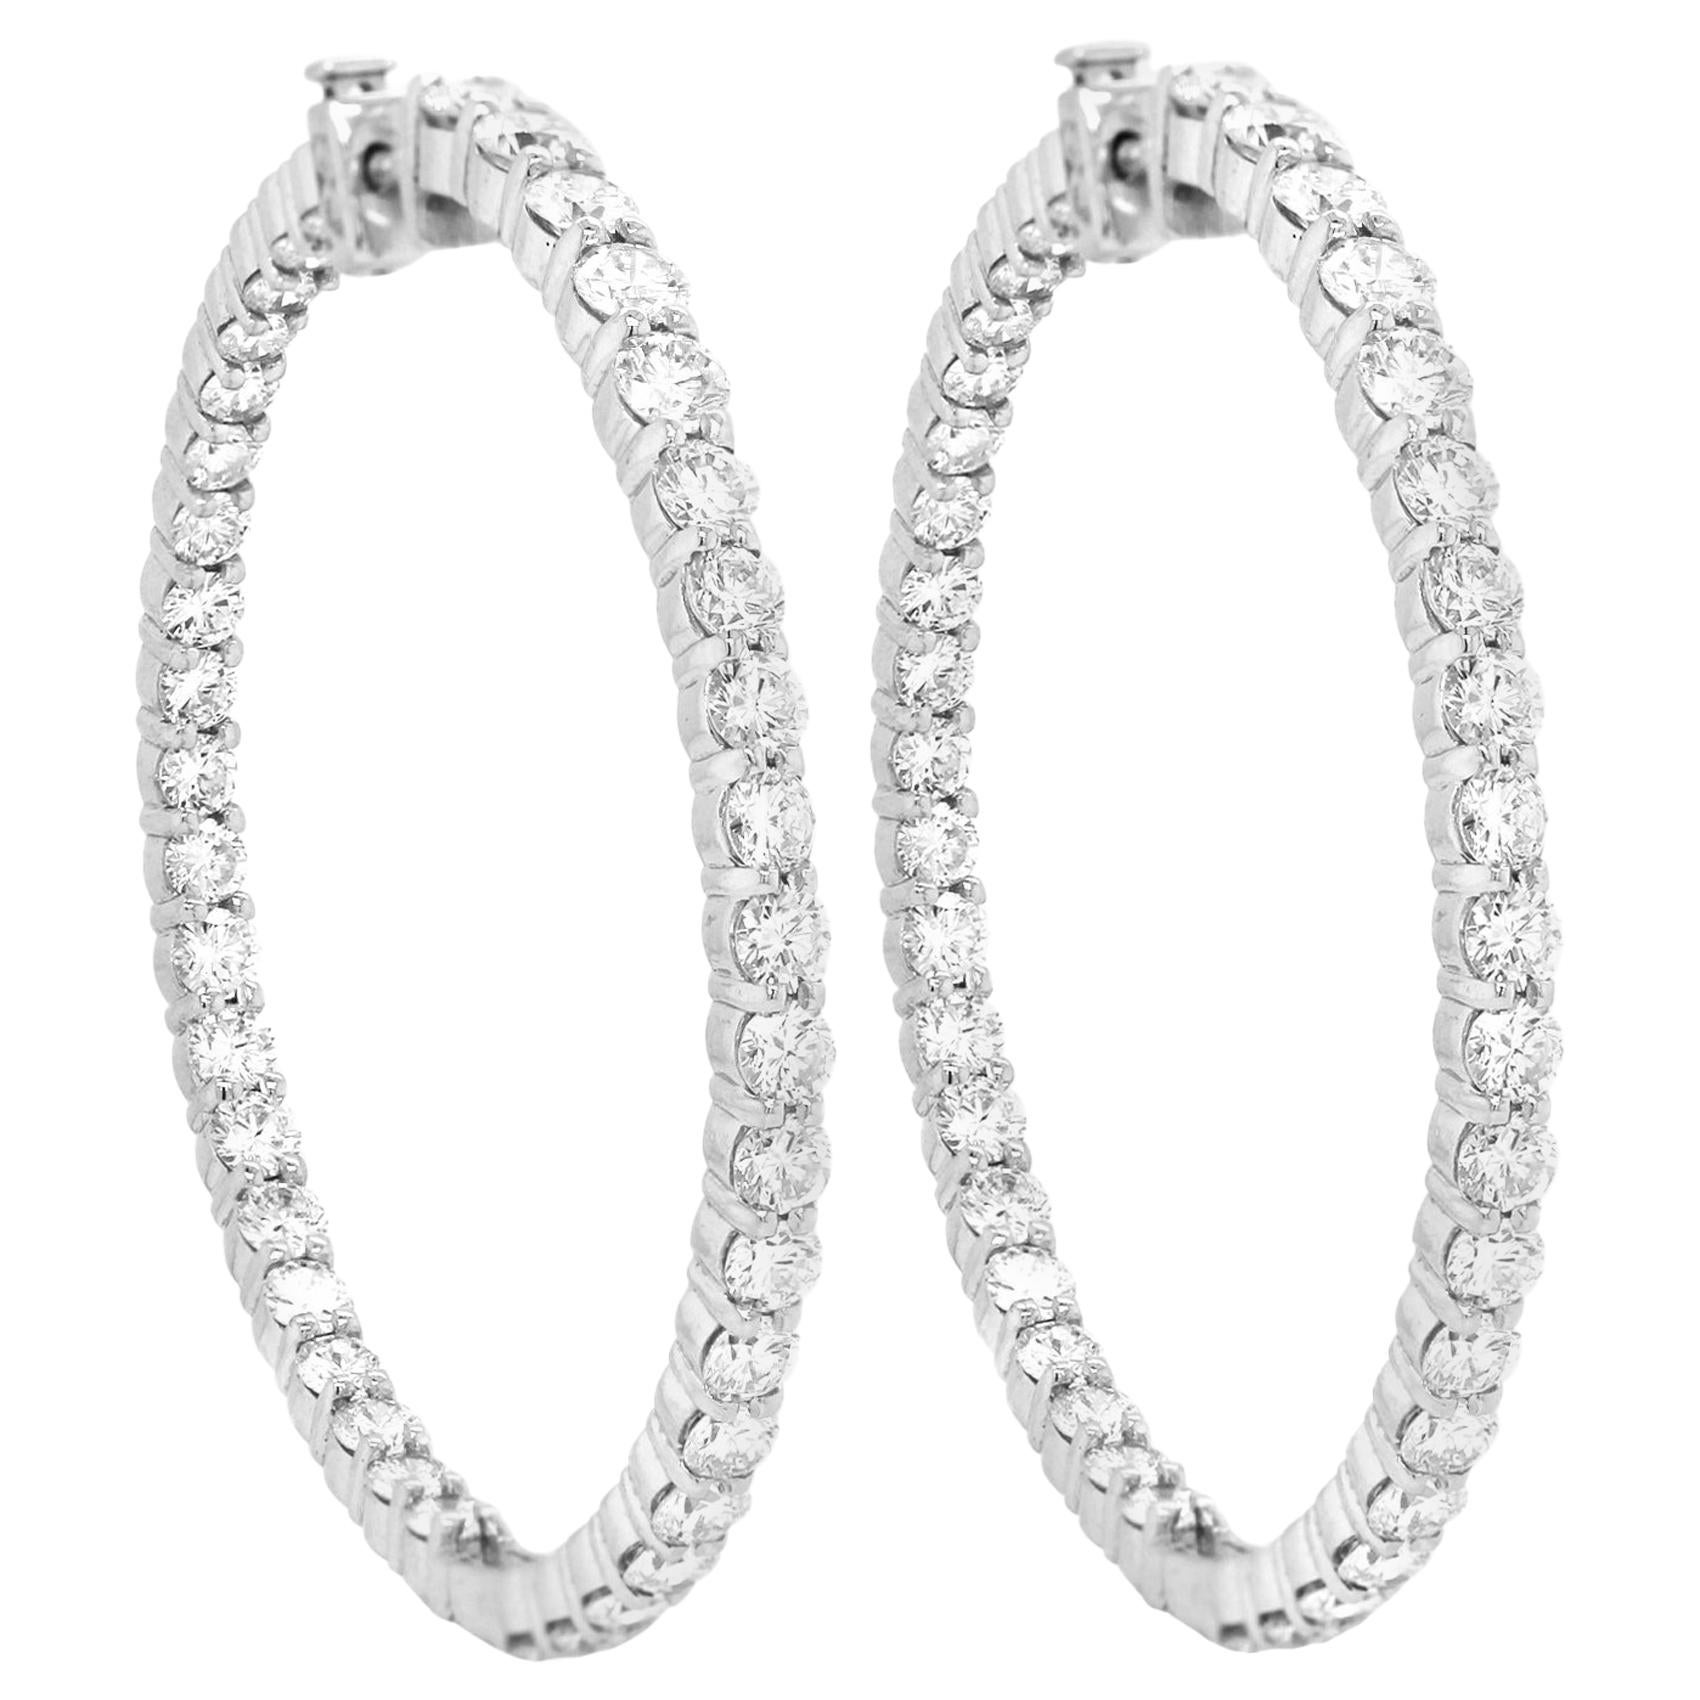 Large Diamond Hoop Earrings Inside Out White Gold at 1stDibs | large ...